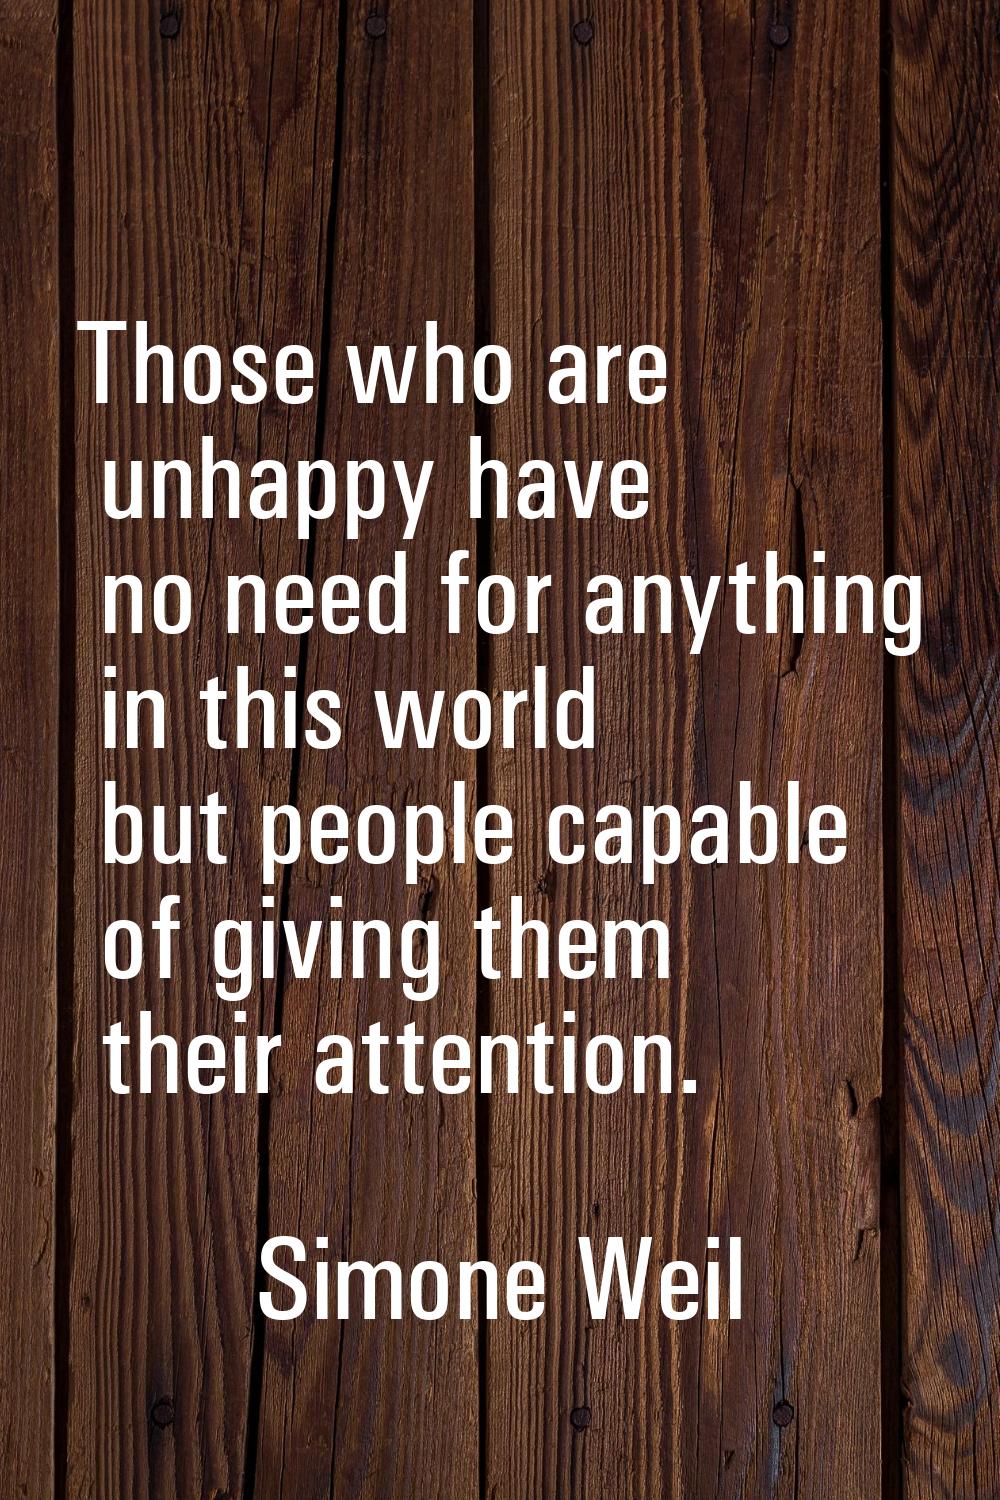 Those who are unhappy have no need for anything in this world but people capable of giving them the